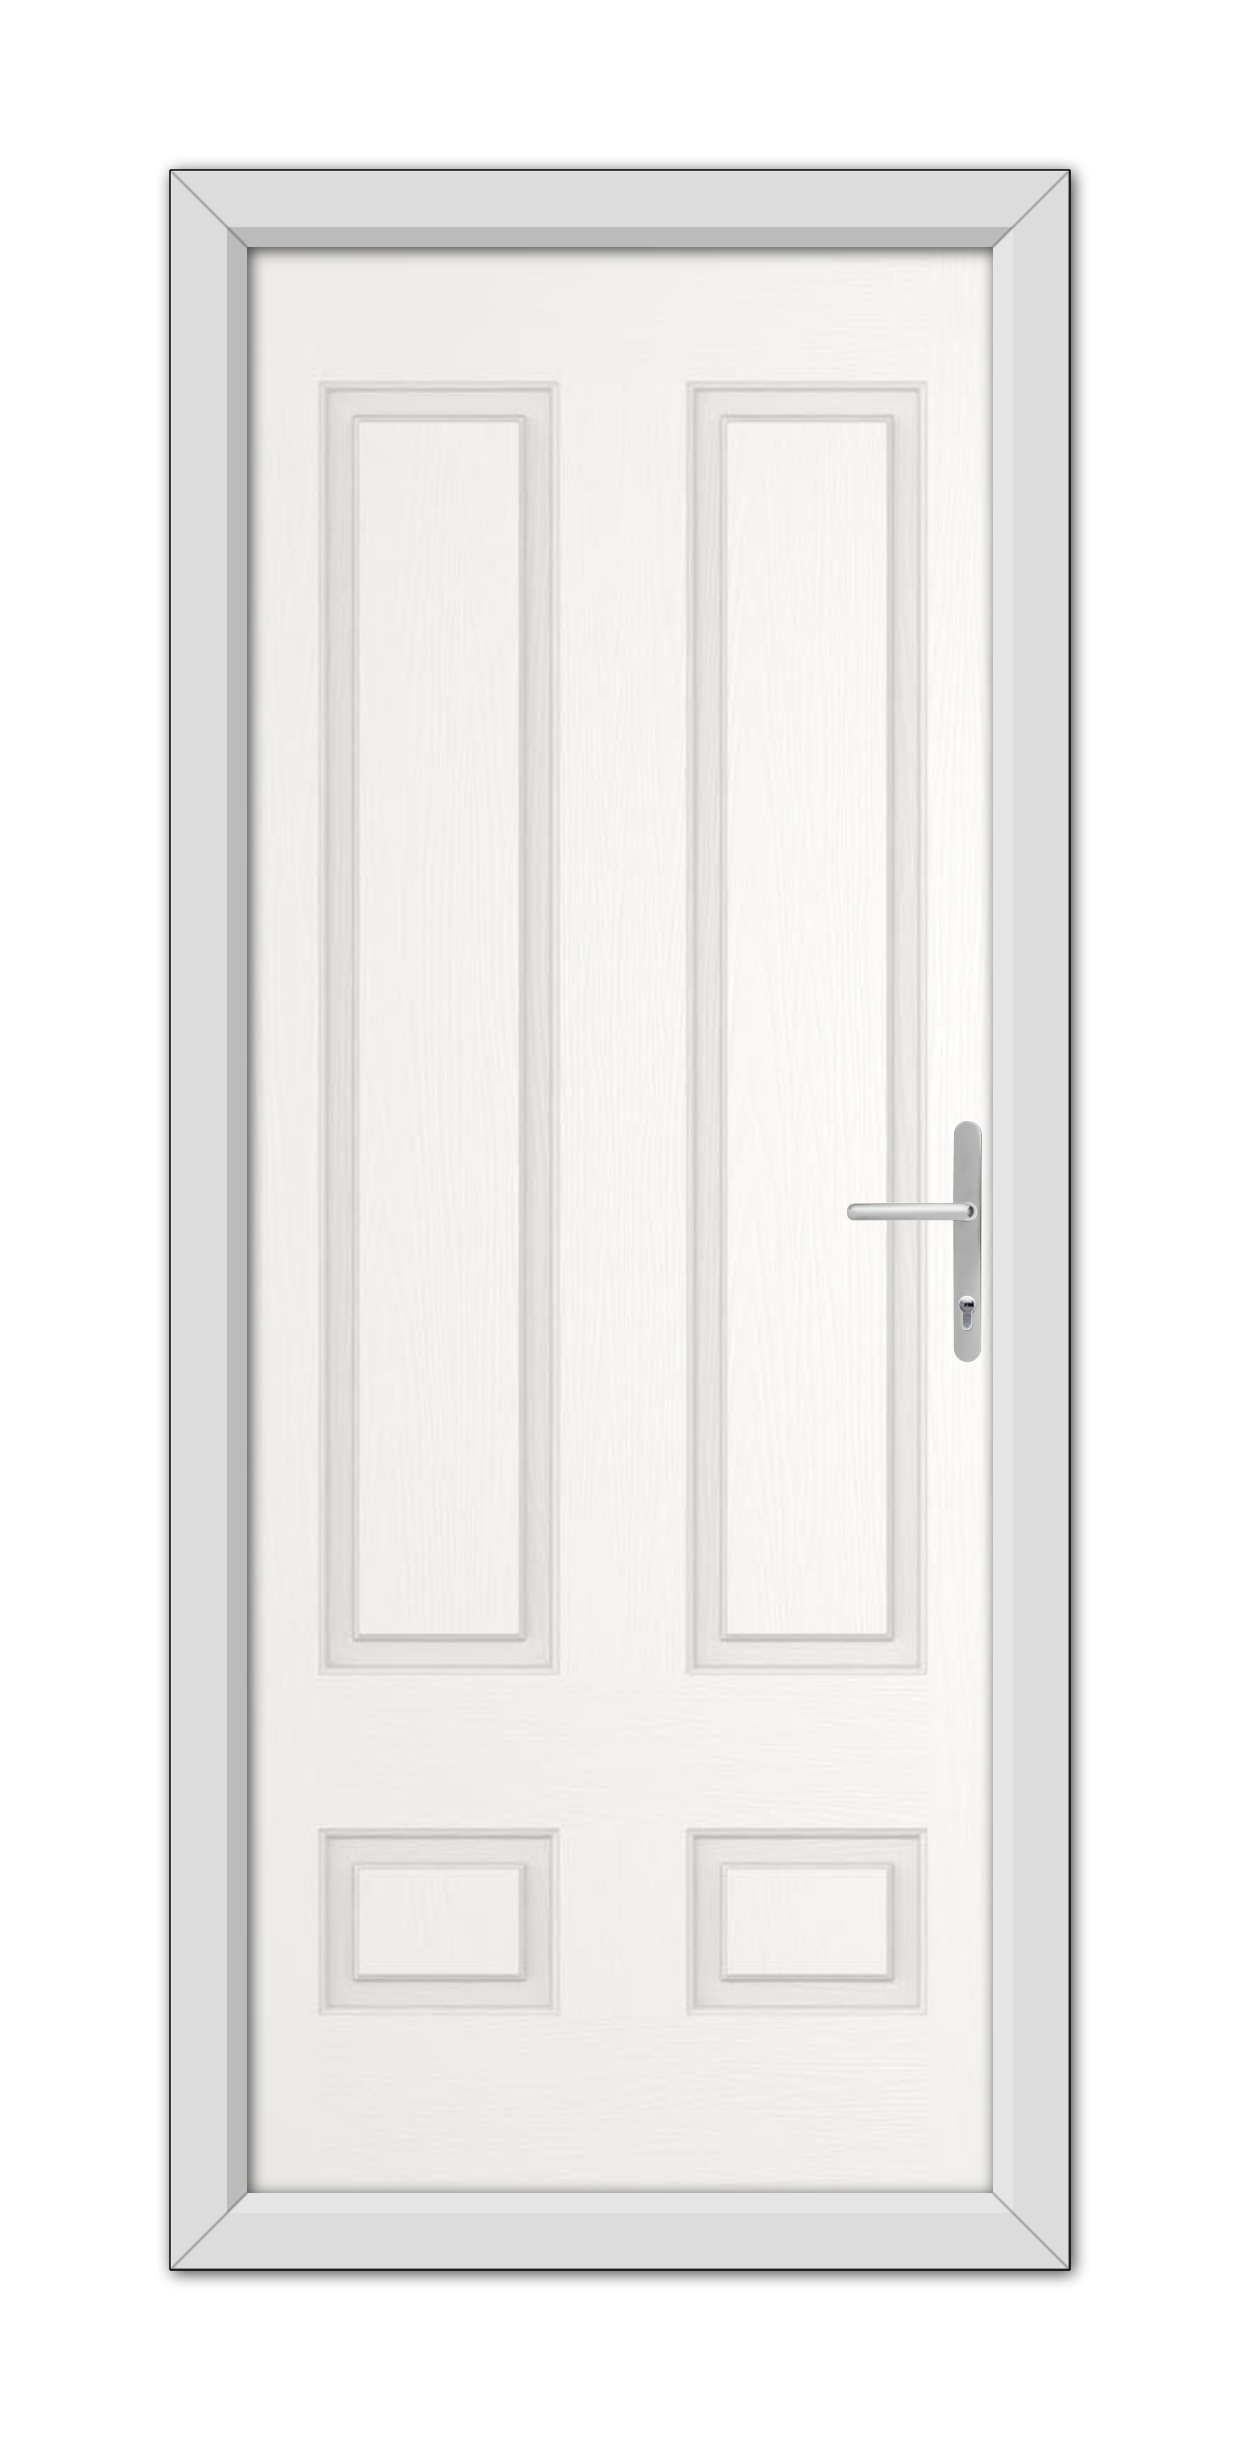 A White Aston Solid Composite Door 48mm Timber Core with a simple design featuring panels and a metallic handle, set within a plain frame.